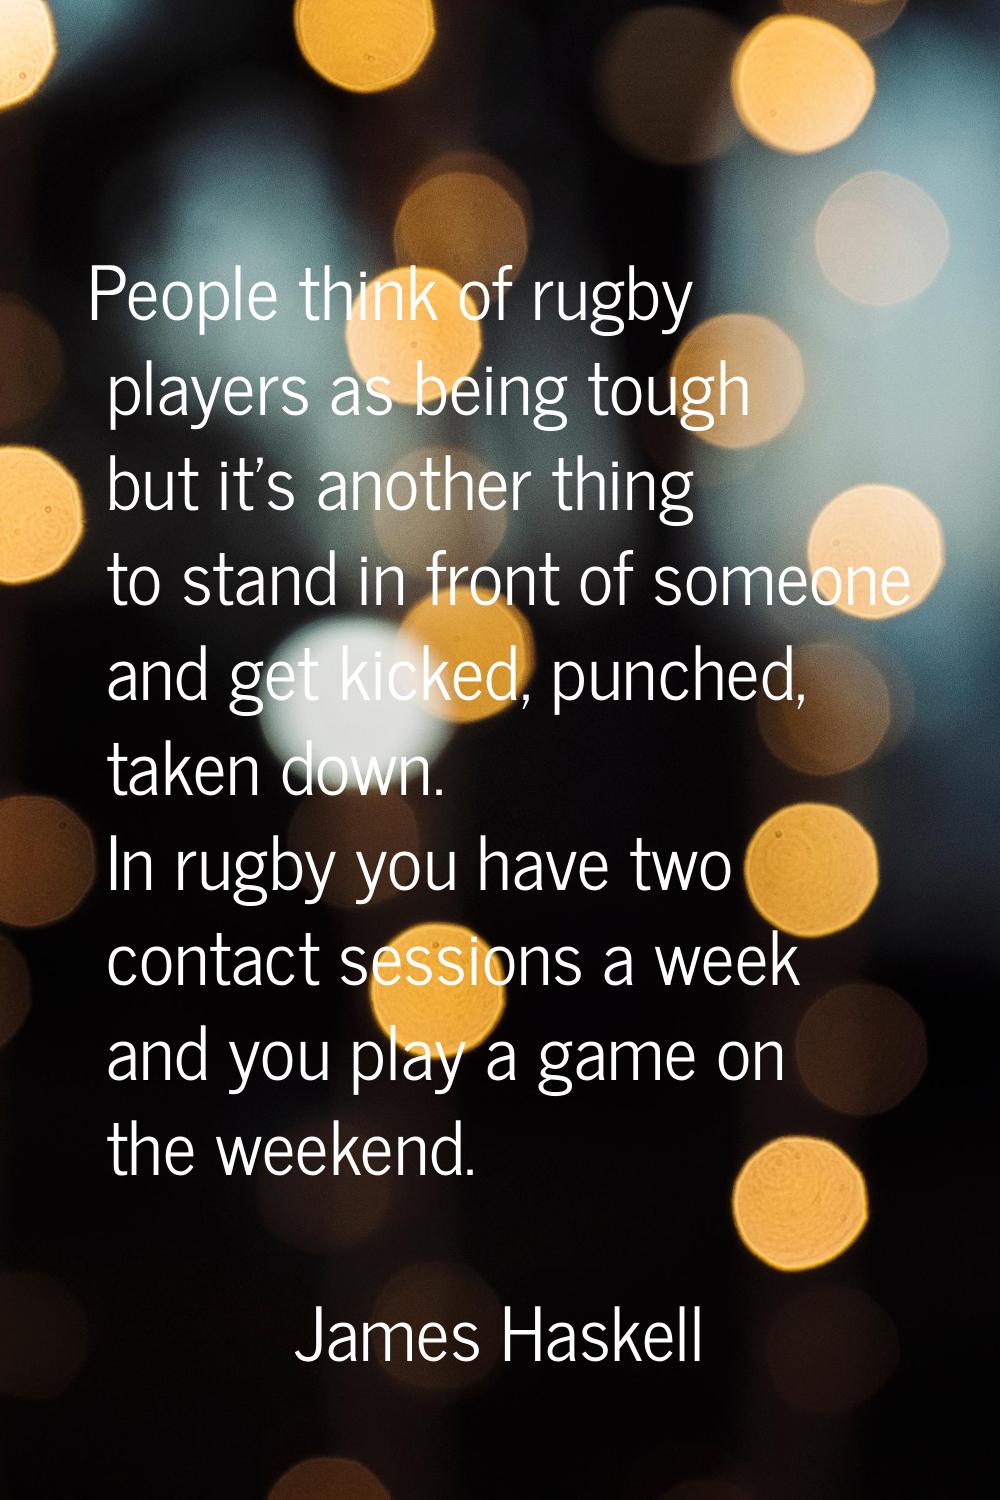 People think of rugby players as being tough but it's another thing to stand in front of someone an